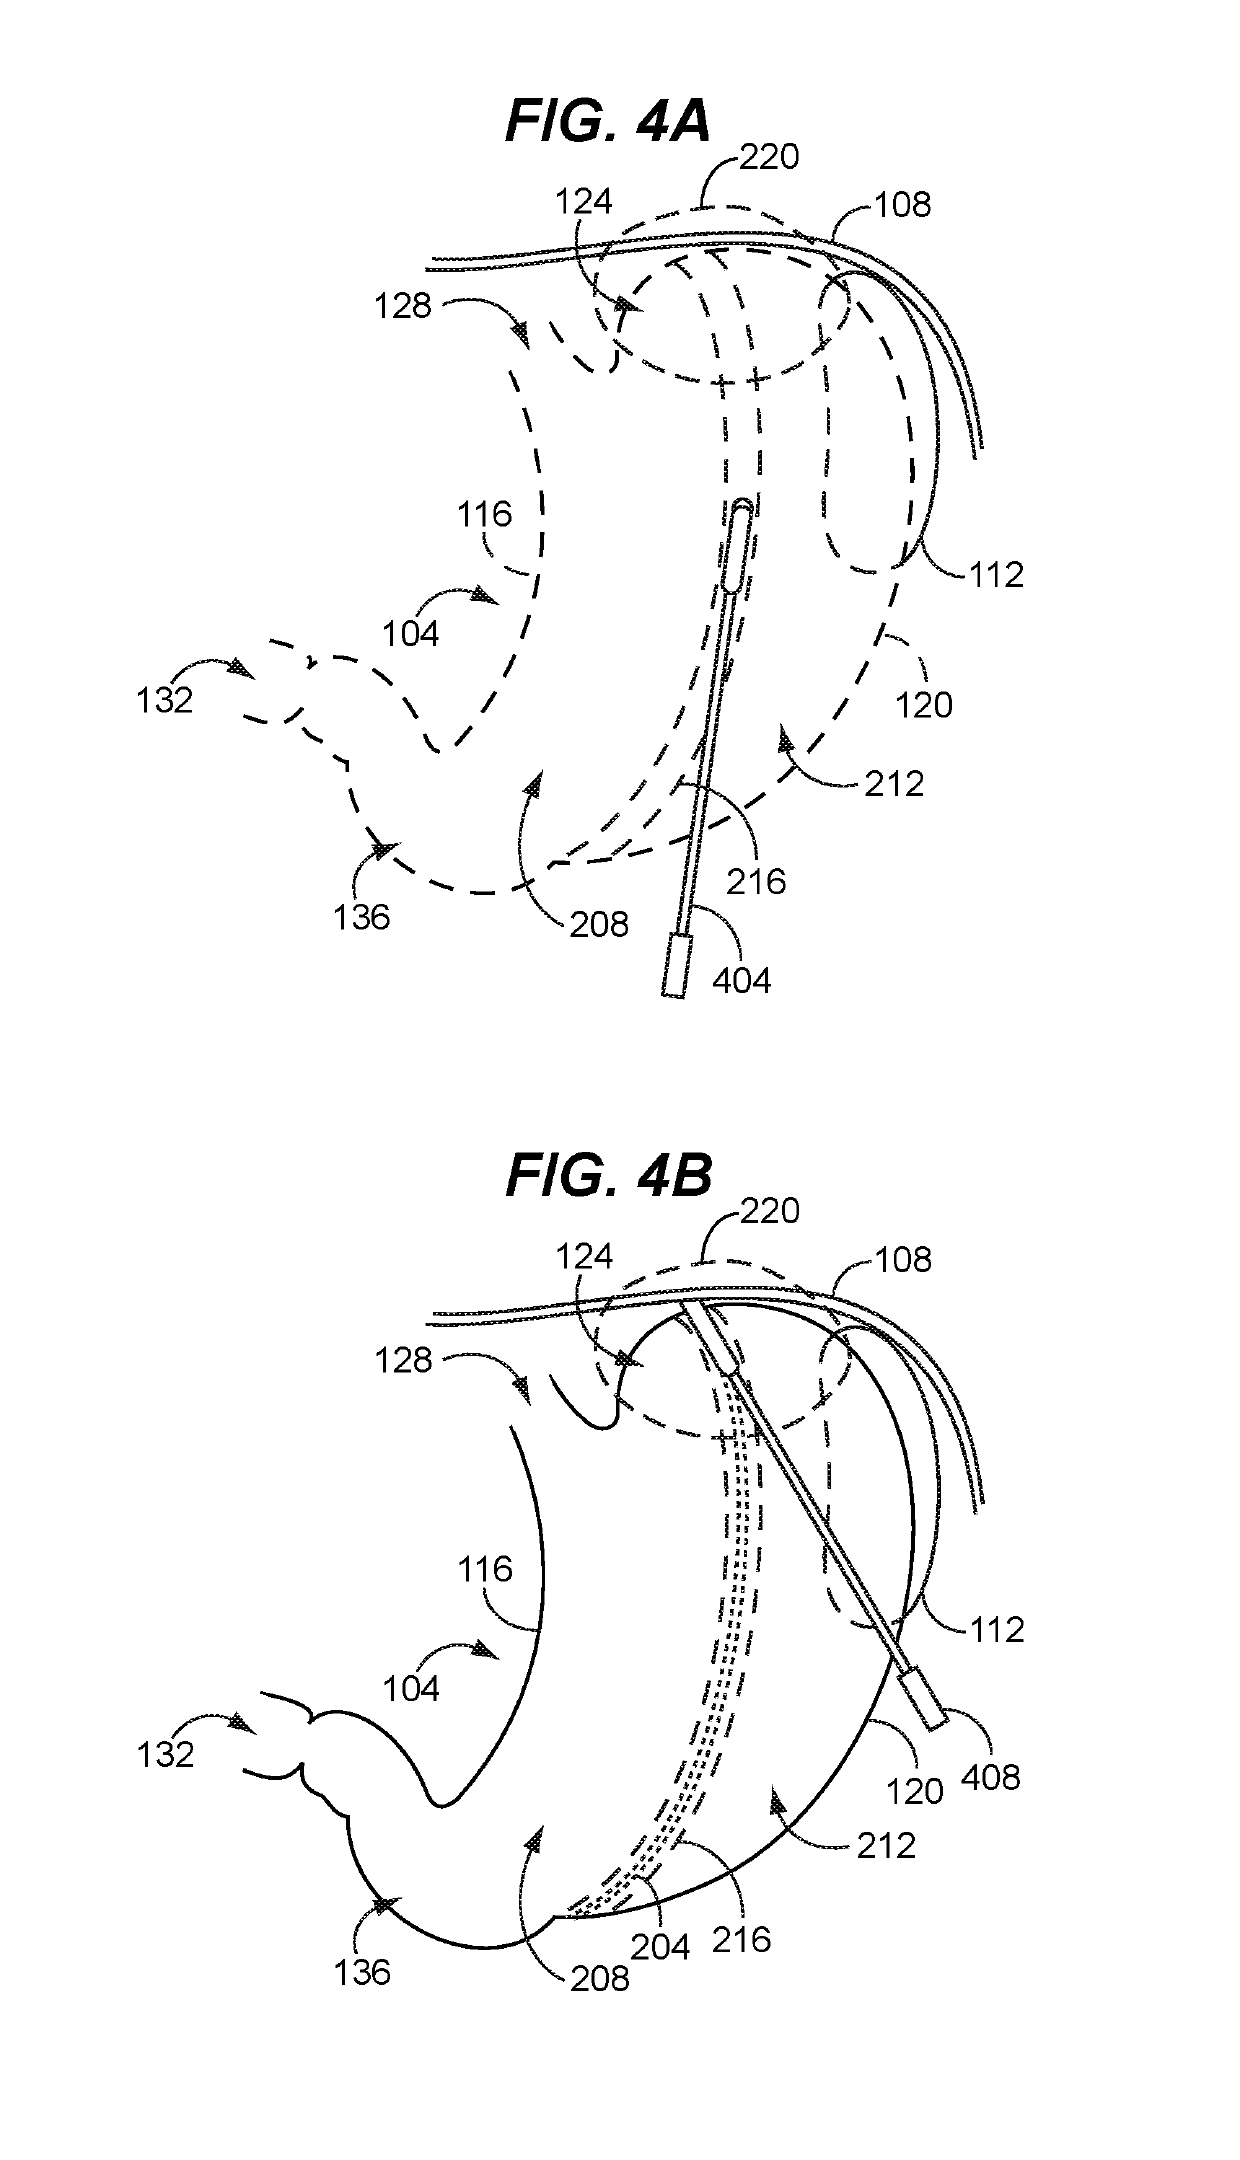 Safe sleeve gastrectomy and intestinal switch